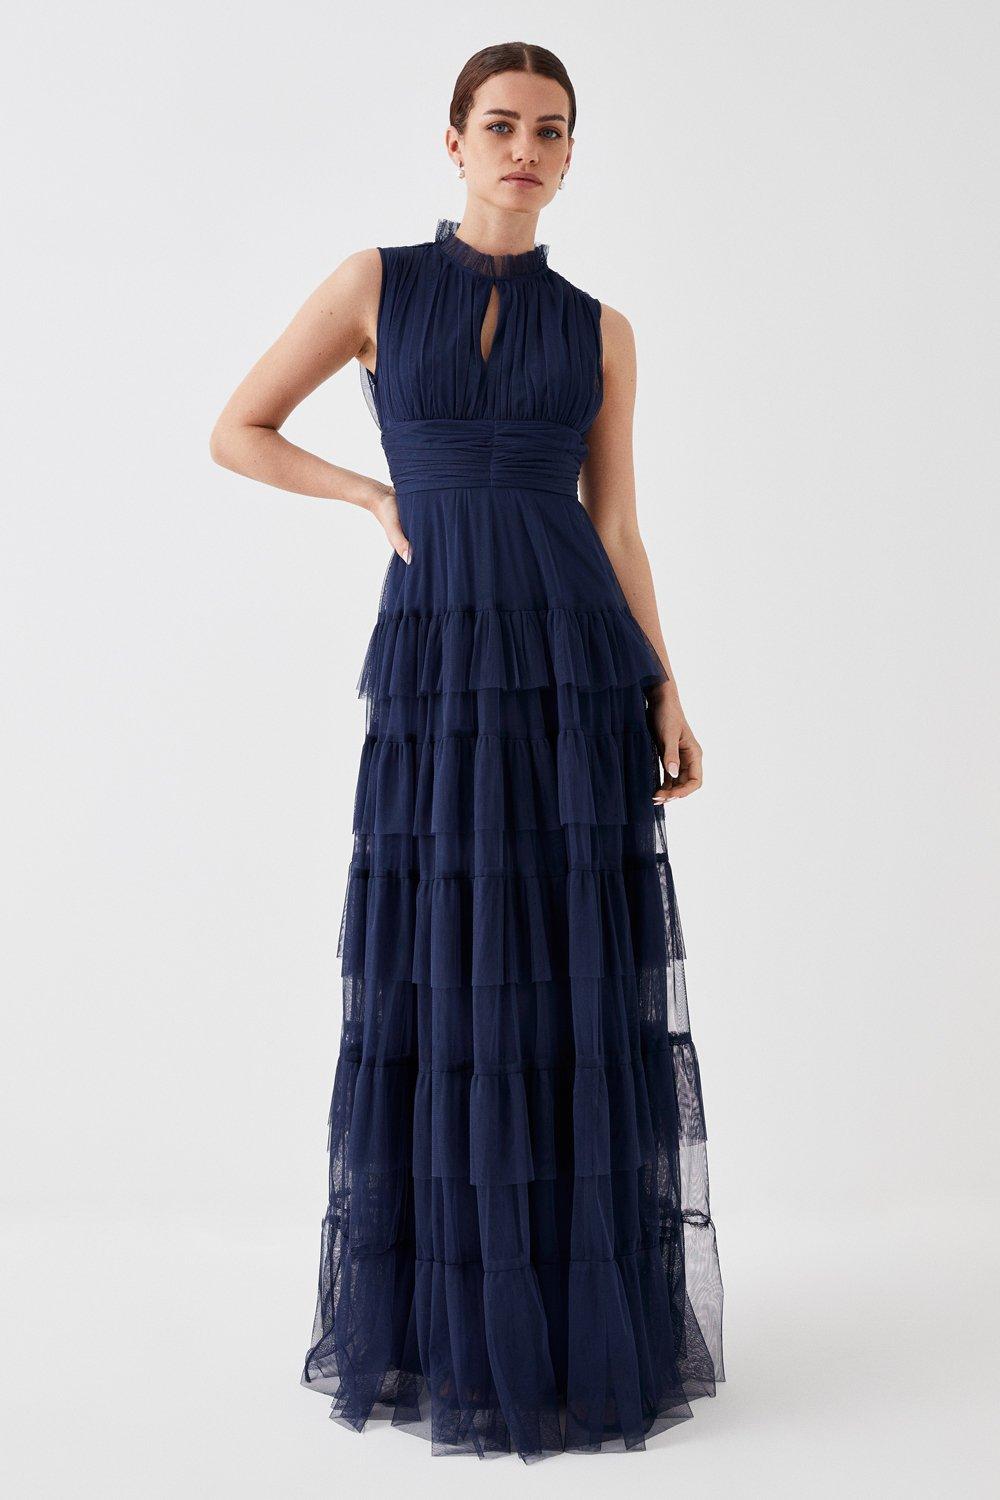 Petite Tulle Tiered Frill Sleeve Bridesmaids Maxi Dress